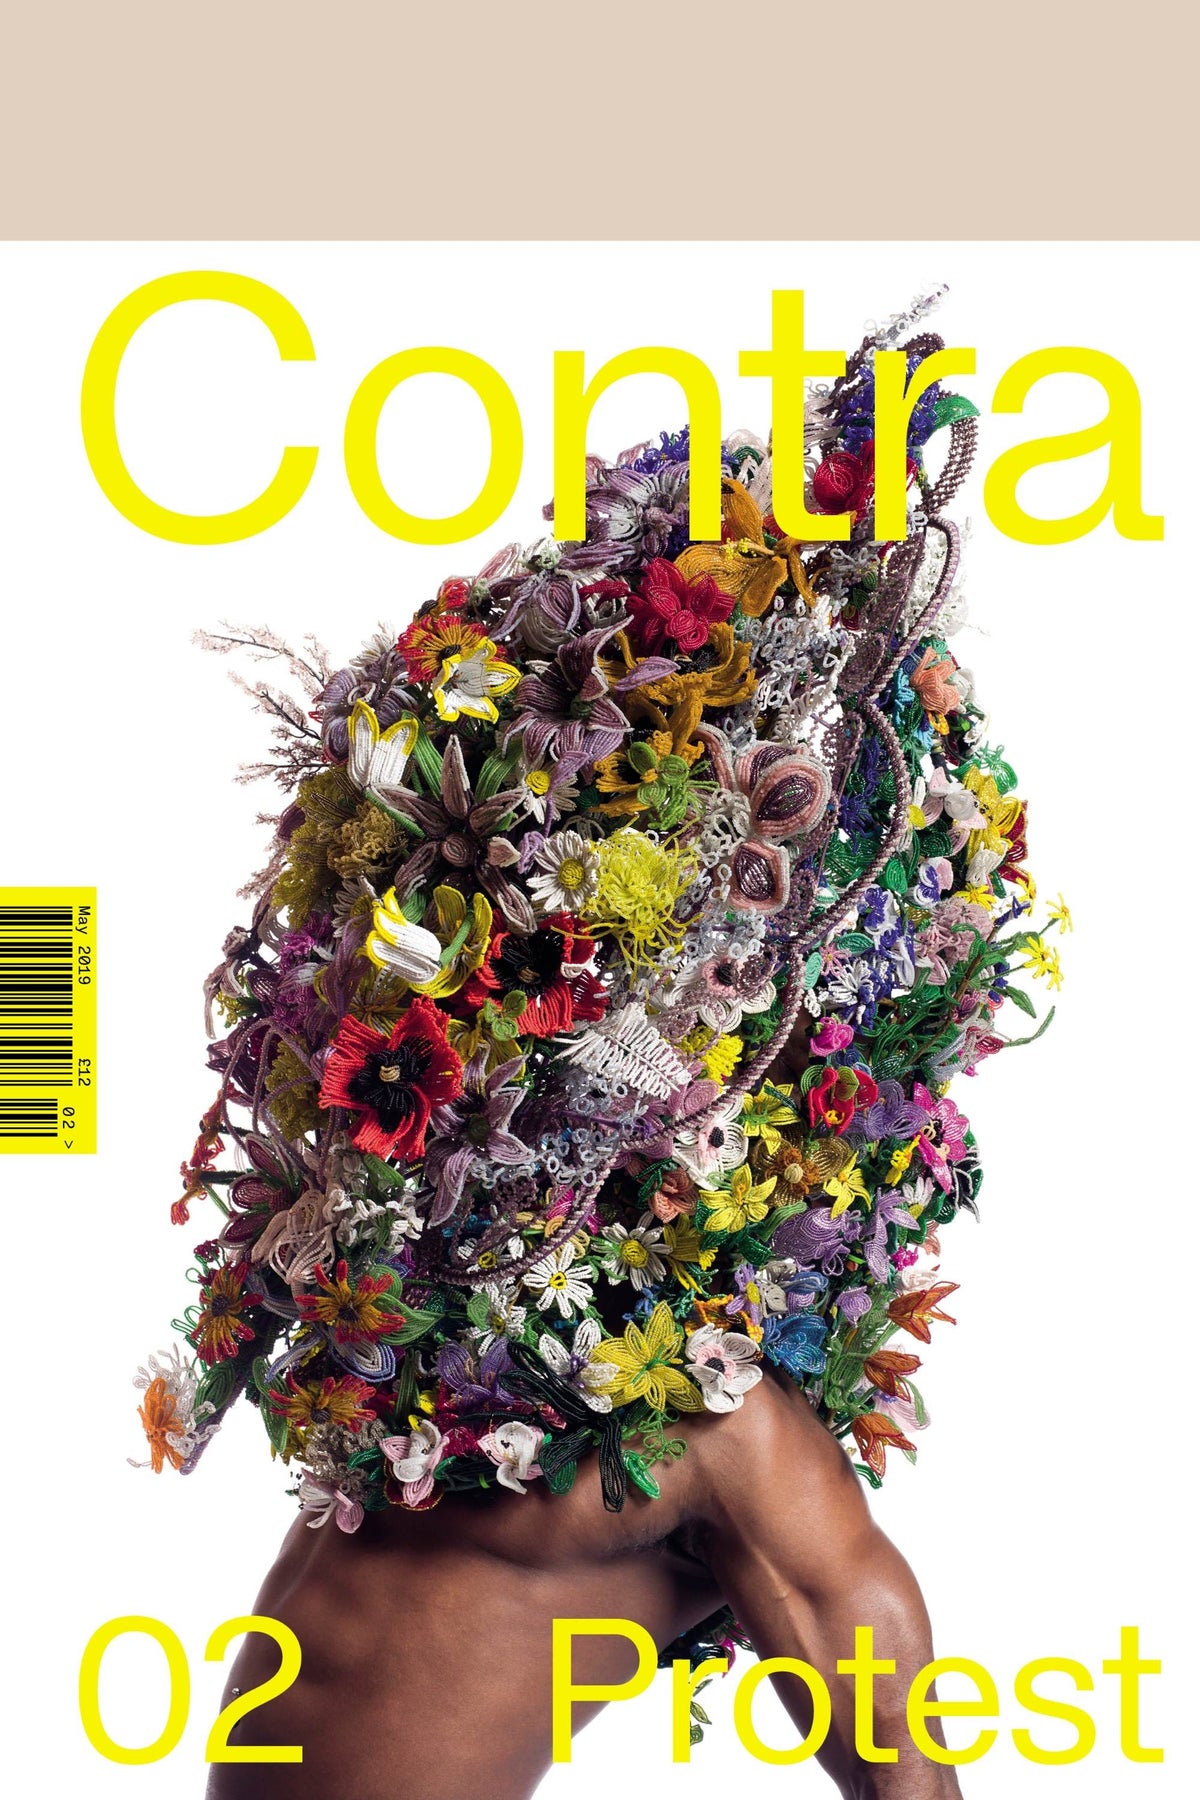 Contra Issue 02 Protest